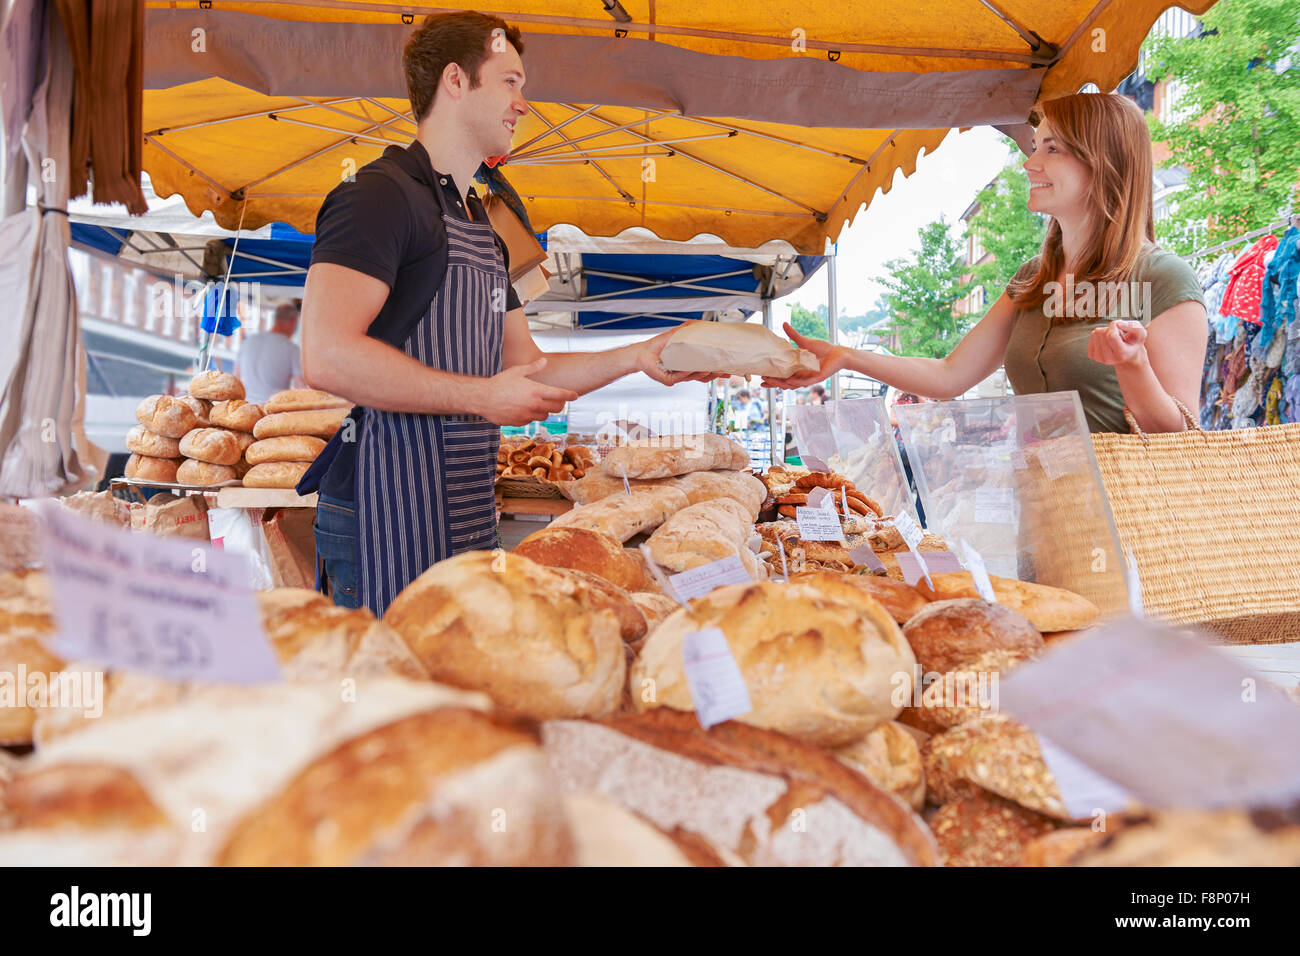 Customer Buying Loaf From Market Bread Stall Stock Photo